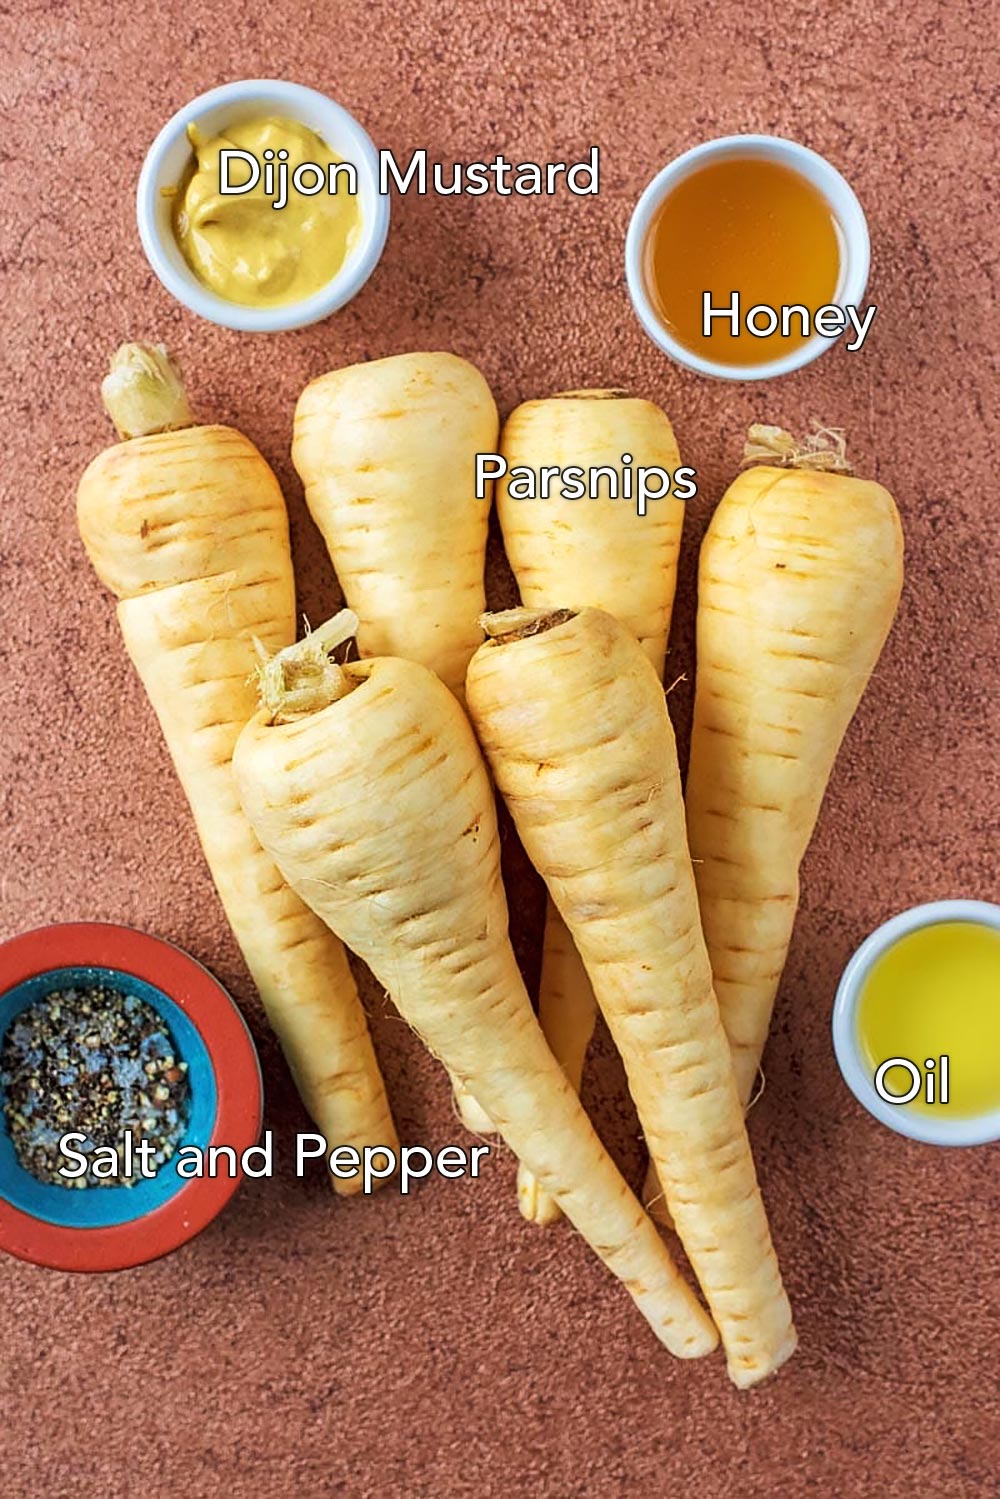 Parsnips, oil, honey, mustard and salt and pepper on a brown surface.